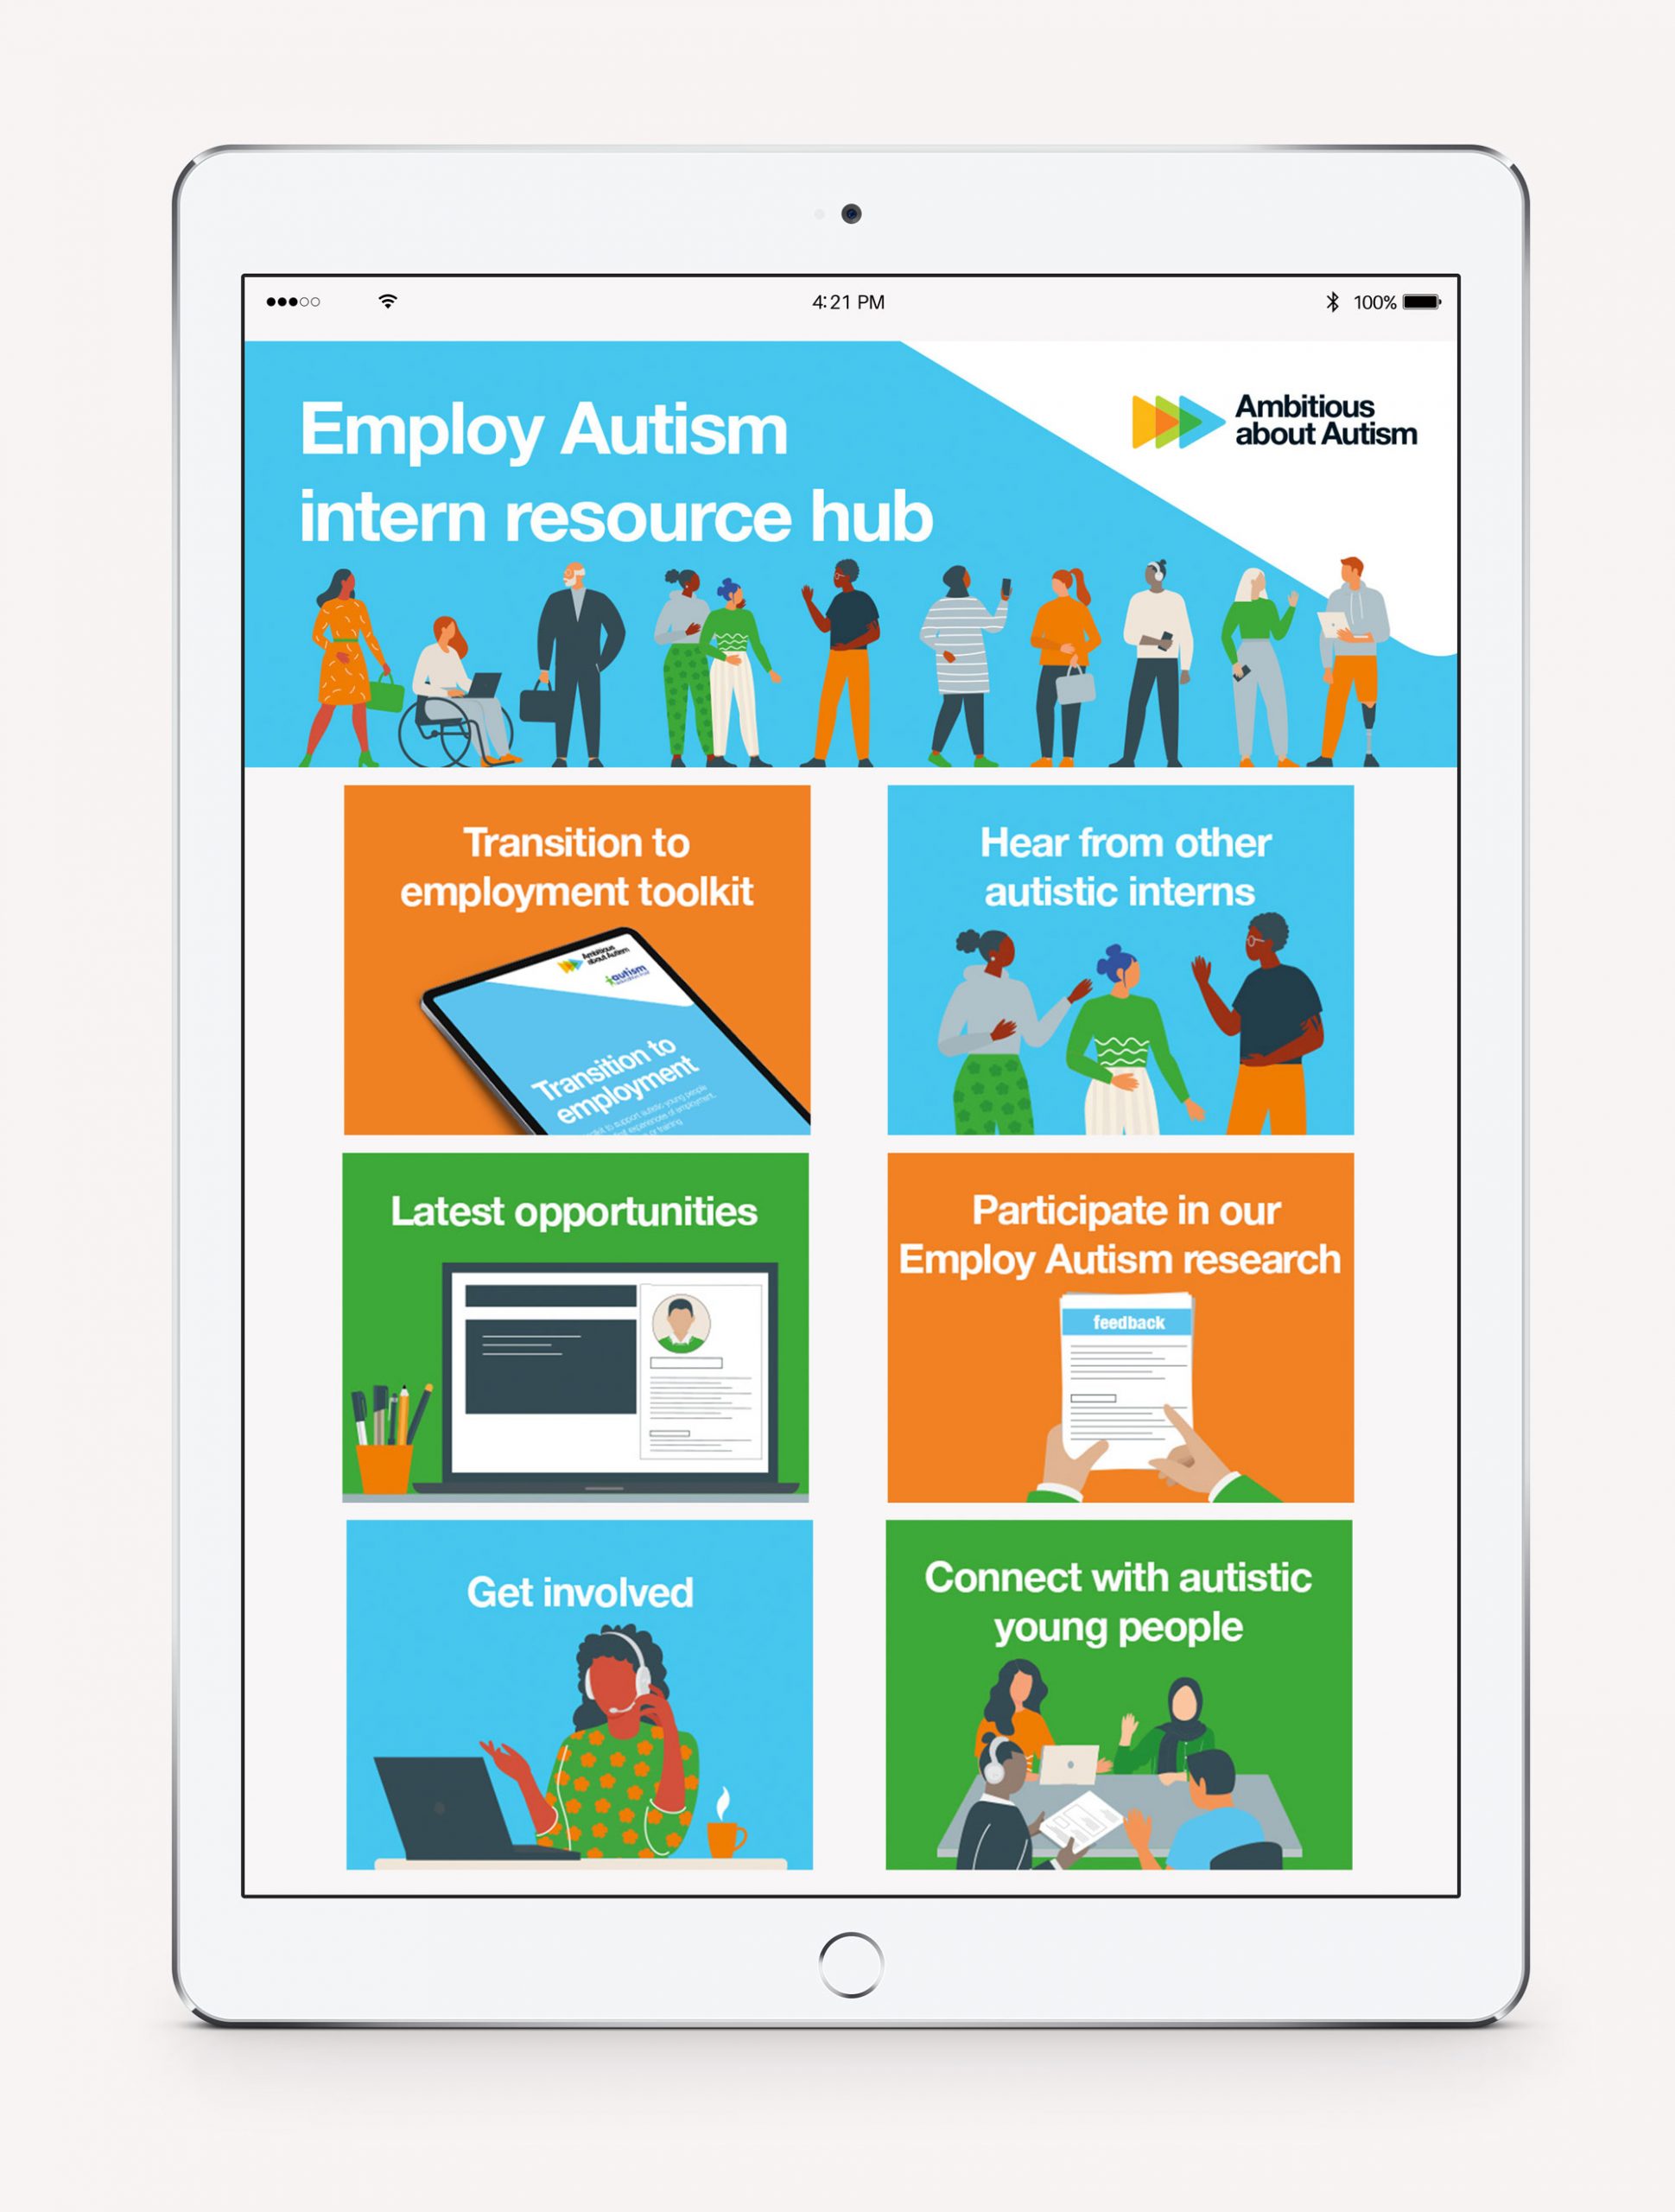 Ambitions about autism Employ Autism intern resources hub